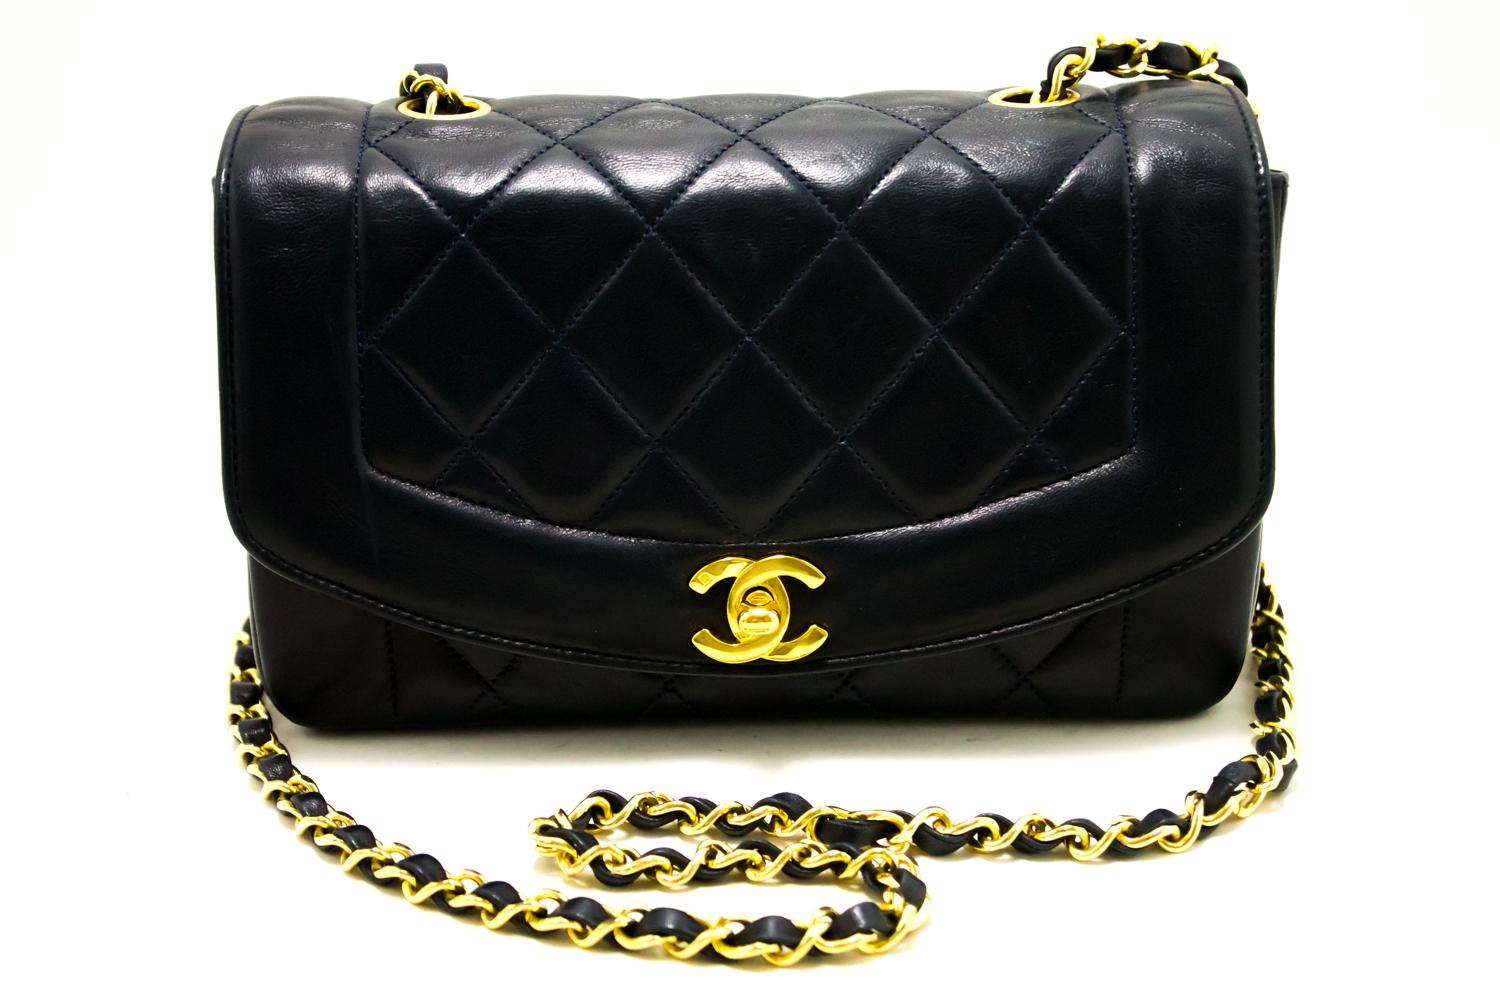 An authentic CHANEL Diana Flap Chain Shoulder Bag Crossbody Navy Quilted Lamb. The color is Navy. The outside material is Leather. The pattern is Solid.
Conditions & Ratings
Outside material: Lambskin
Color: Navy
Closure: Turnlock
Hardware and